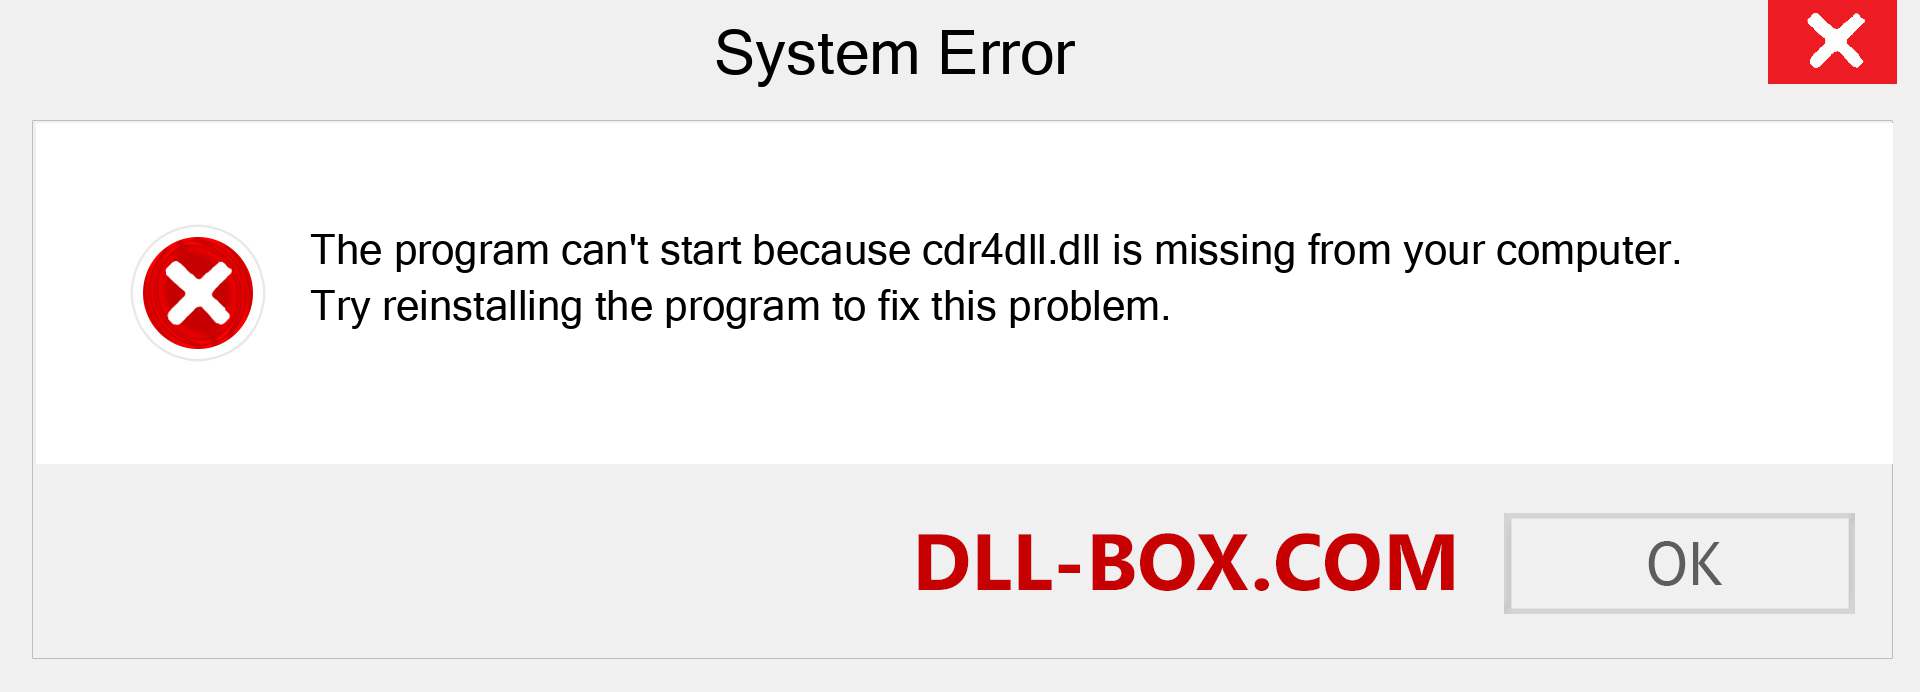  cdr4dll.dll file is missing?. Download for Windows 7, 8, 10 - Fix  cdr4dll dll Missing Error on Windows, photos, images